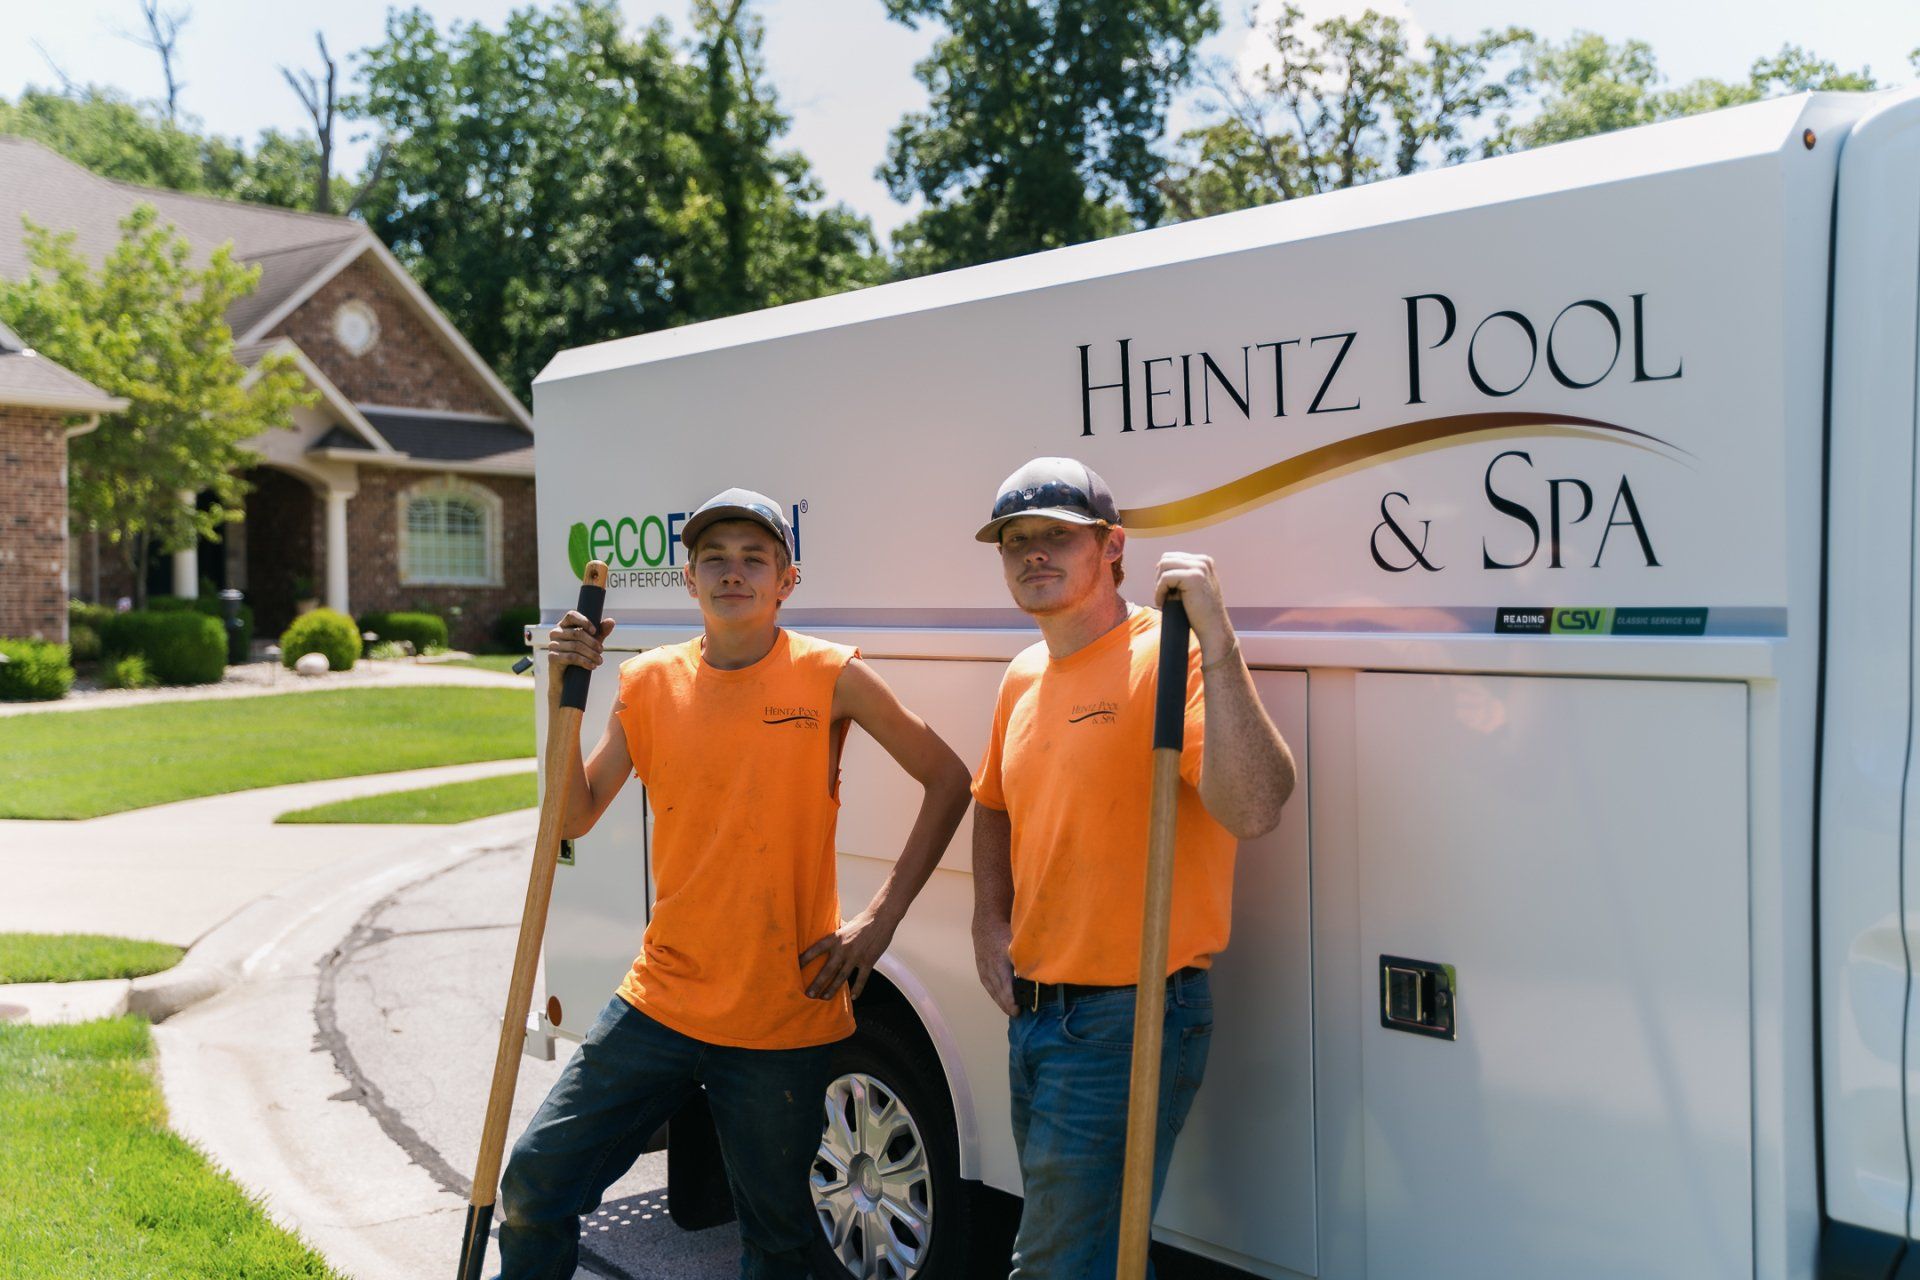 Two members of Heintz Pool & Spa team are wearing orange uniform while standing beside the company car